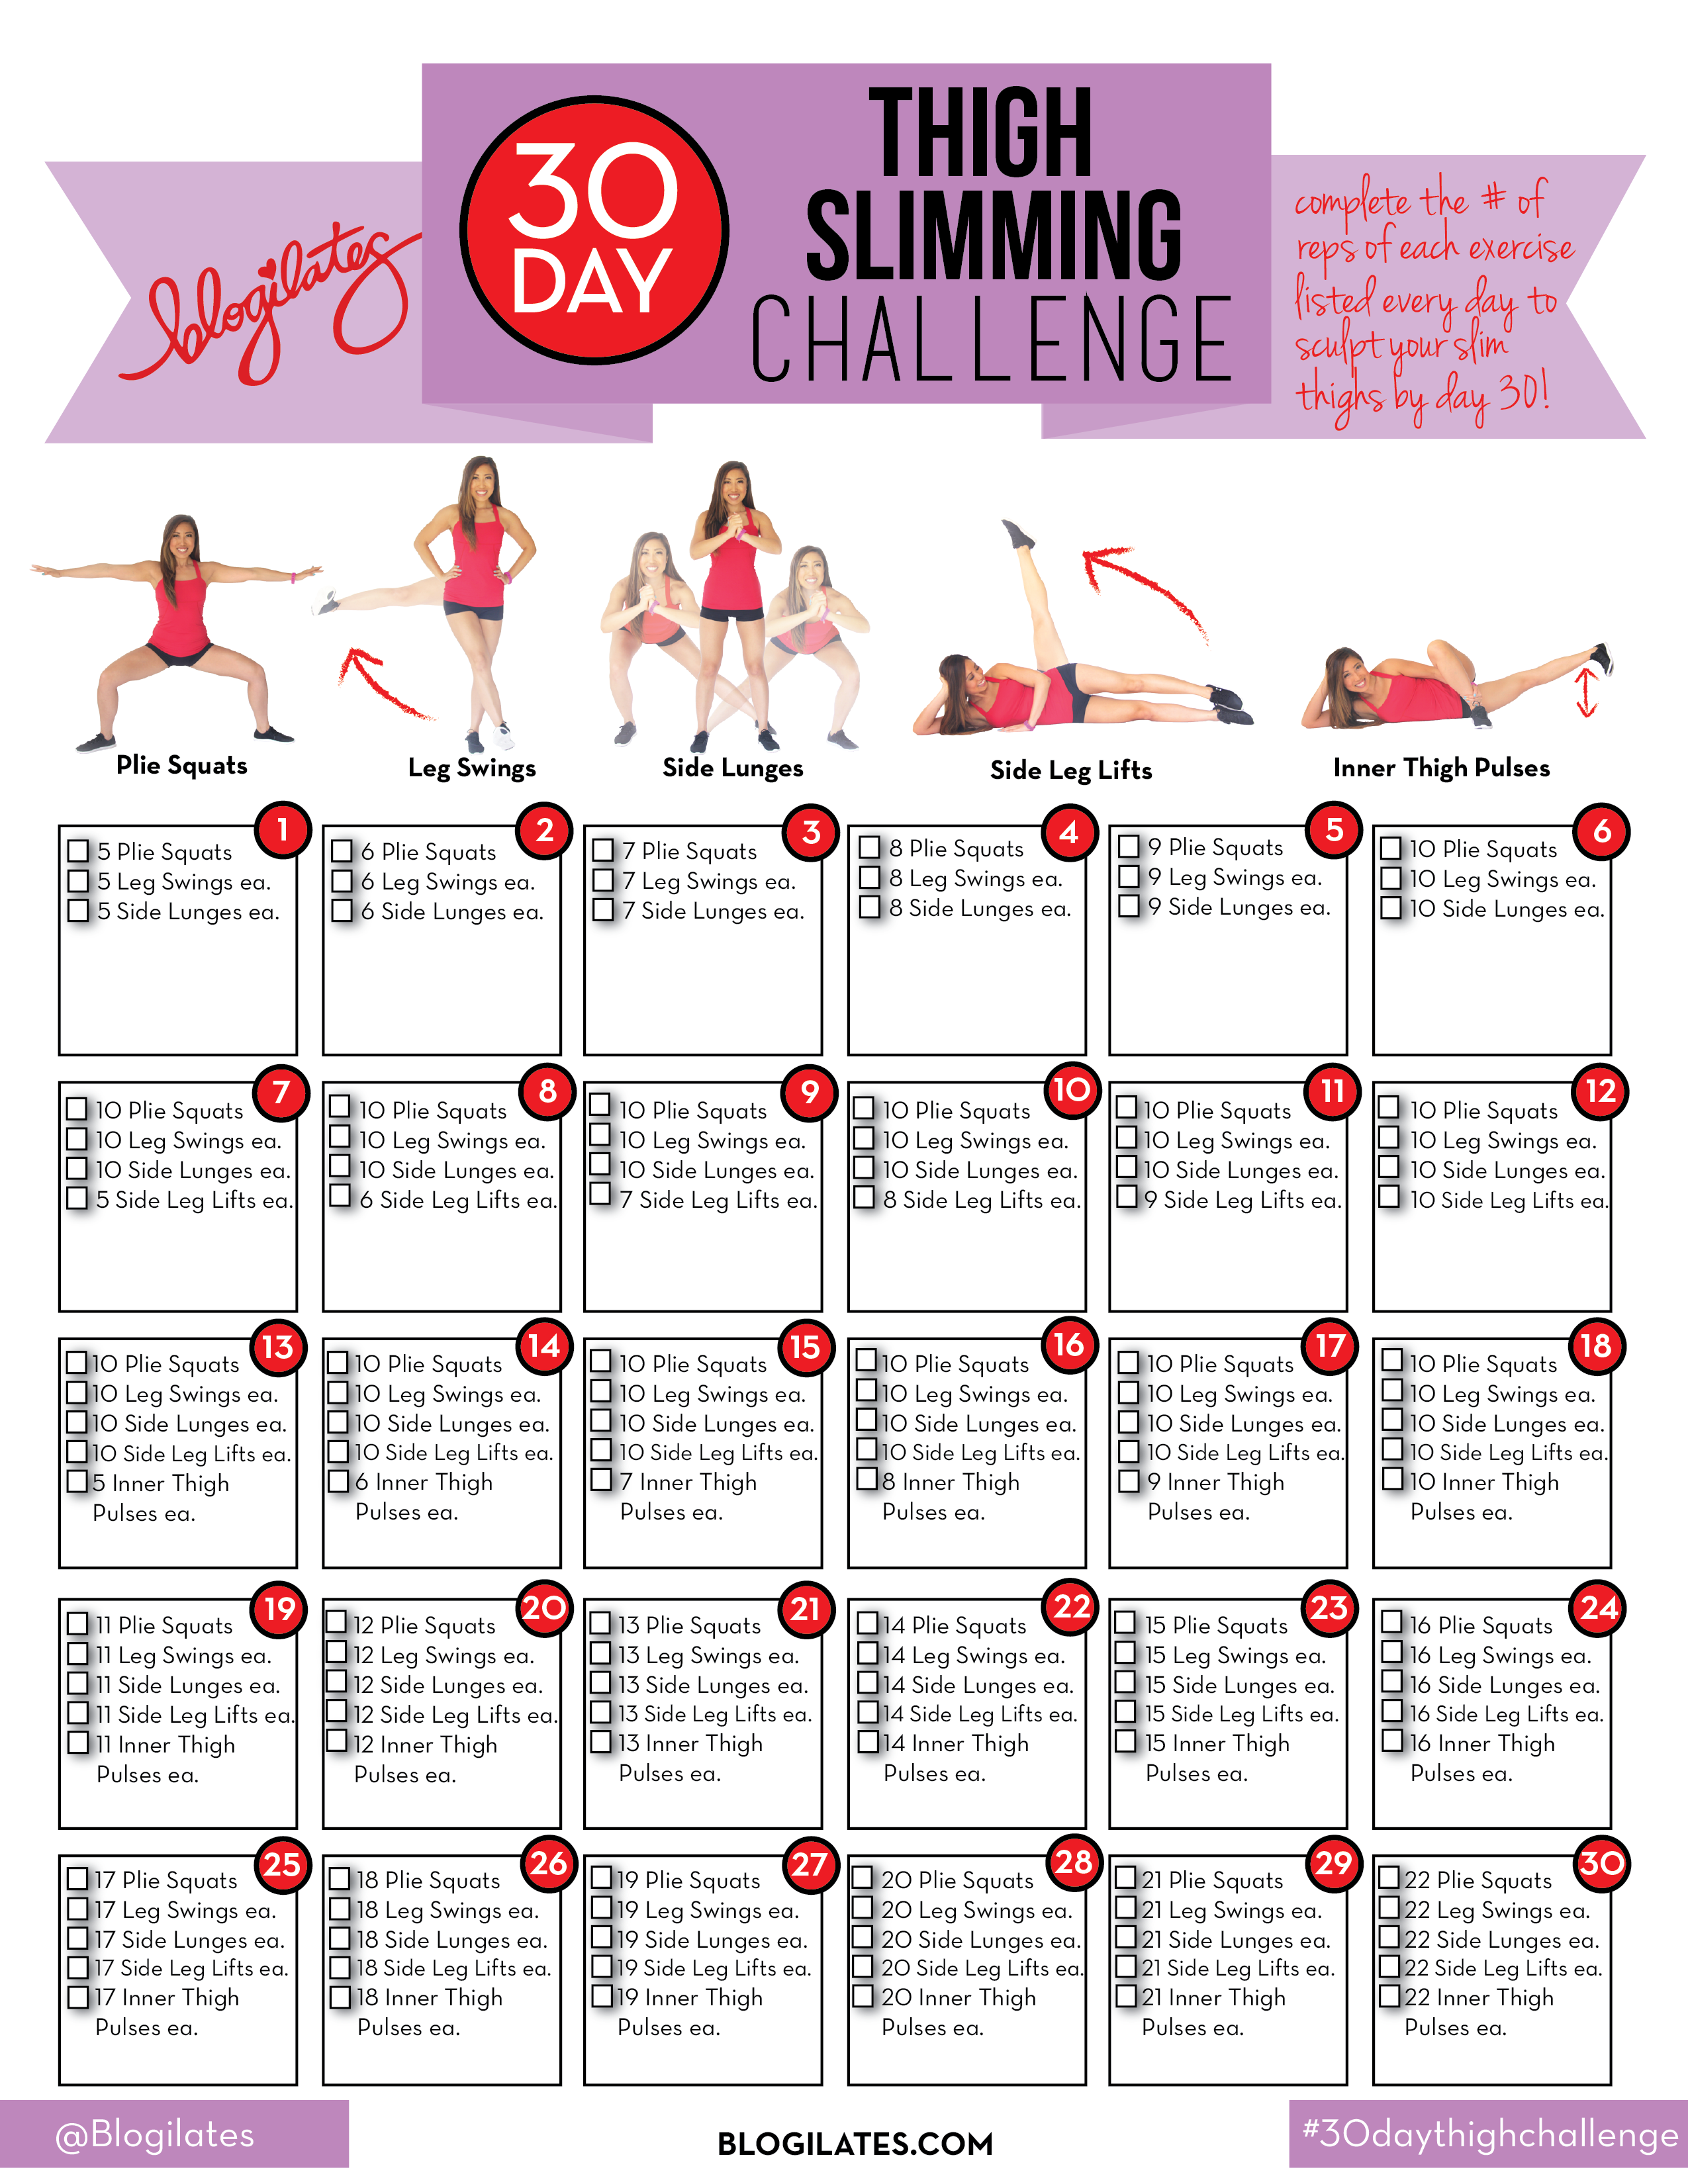 20 Day Thigh Slimming Challenge   Blogilates Fitness, Food, and ...